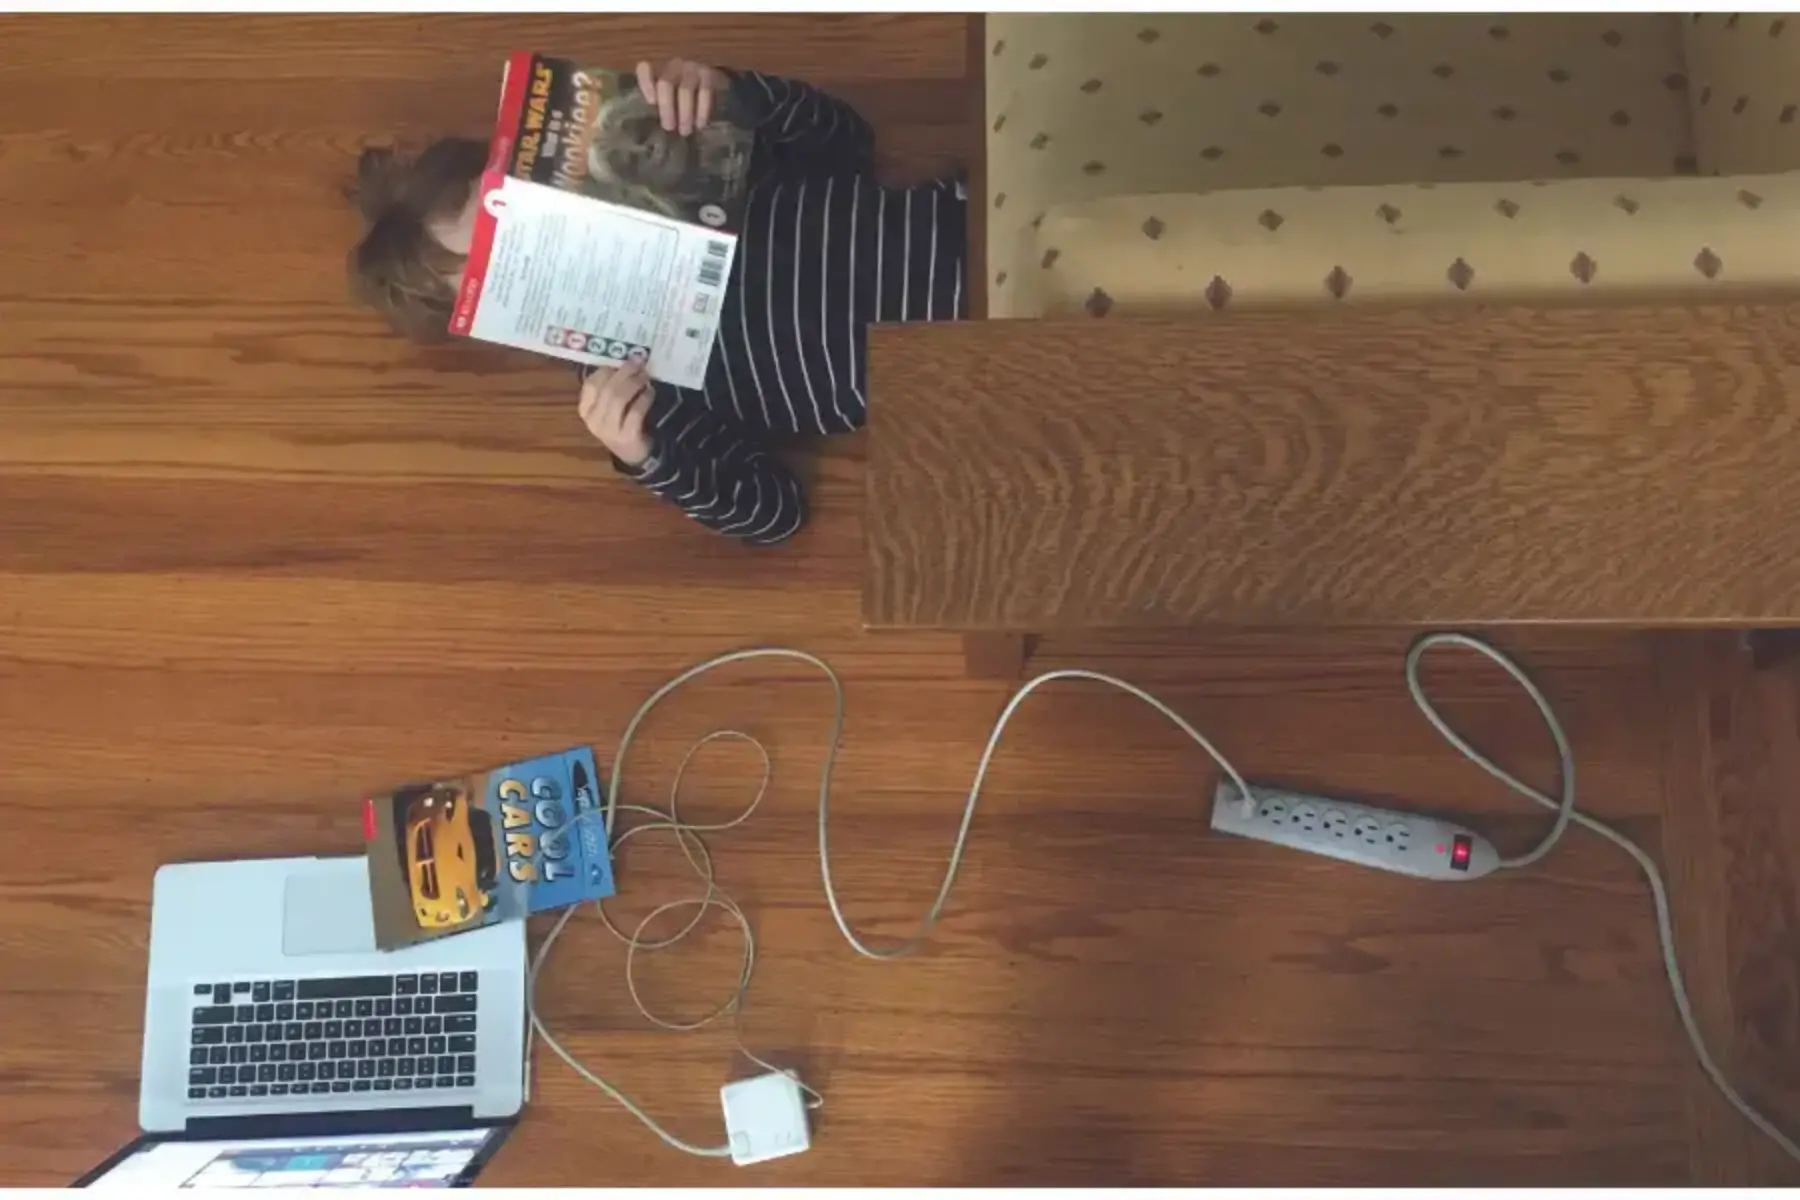 Photo shot from ceiling looking down on a child laying down on the ground with their legs under the couch. The child has brown hair, is wearing a black and white striped shirt, and is reading a Star Wars book. The floor is a dark wood floor. The couch is dark wood with olive green fabric. Next to the child on the floor is a power strip, an open laptop with a Zoom meeting. The laptop is charging via the power strip. And a Cool Cars book lies on top of the laptop keyboard.